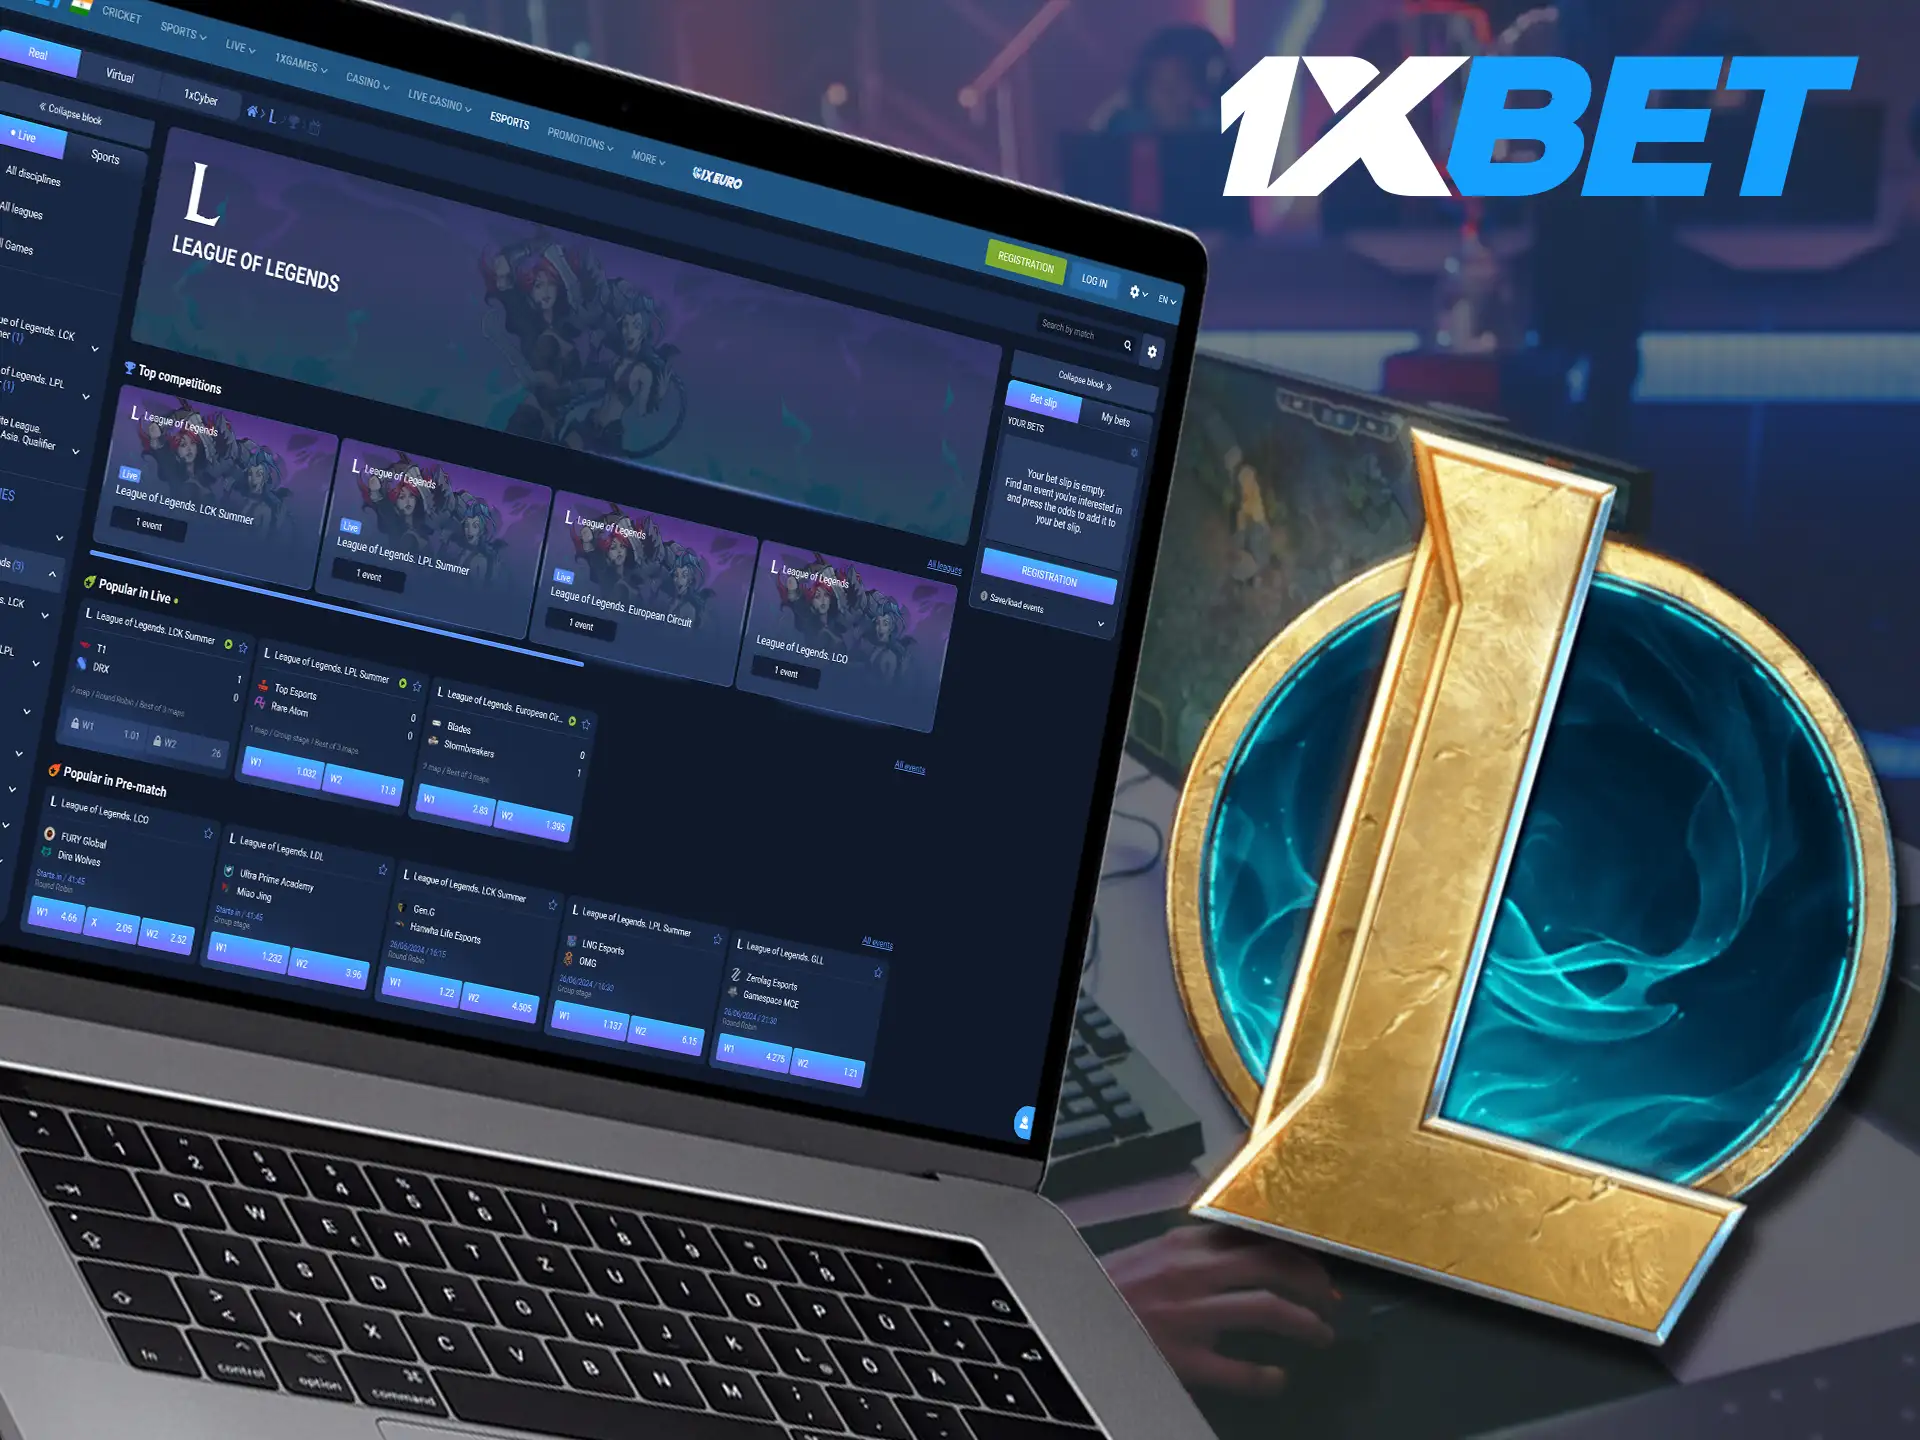 1xBet offers League of Legends pre-match and live betting.